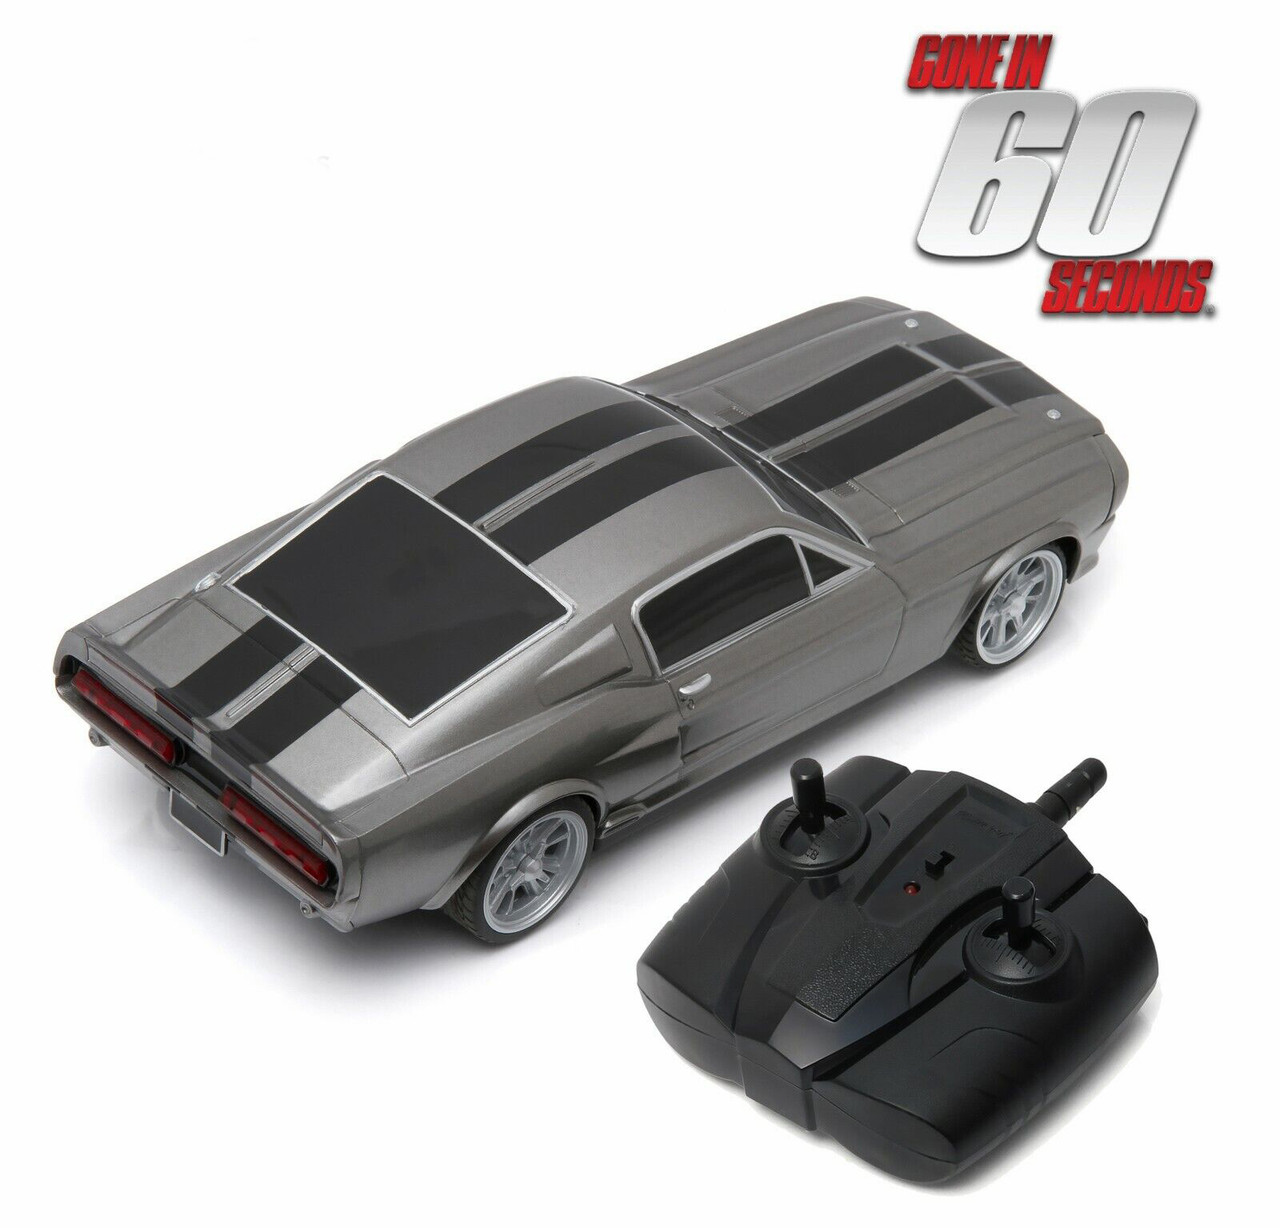 1/18 Greenlight Gone in Sixty Seconds (2000) 1967 Ford Mustang "Eleanor" 2.4 GHz Remote Control Car Model